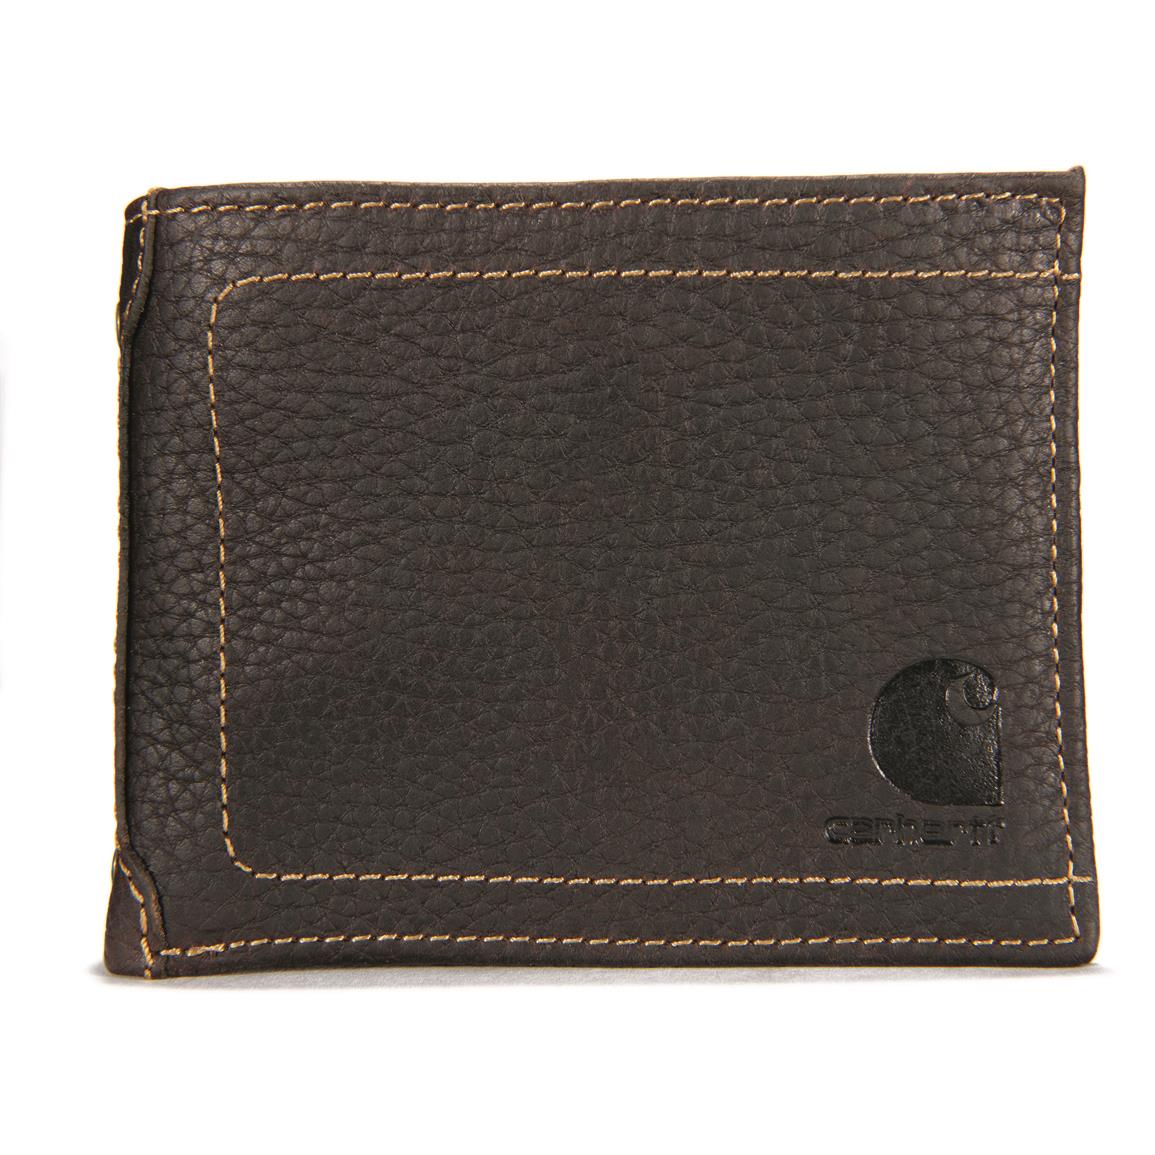 Carhartt Leather Passcase Wallet, Brown